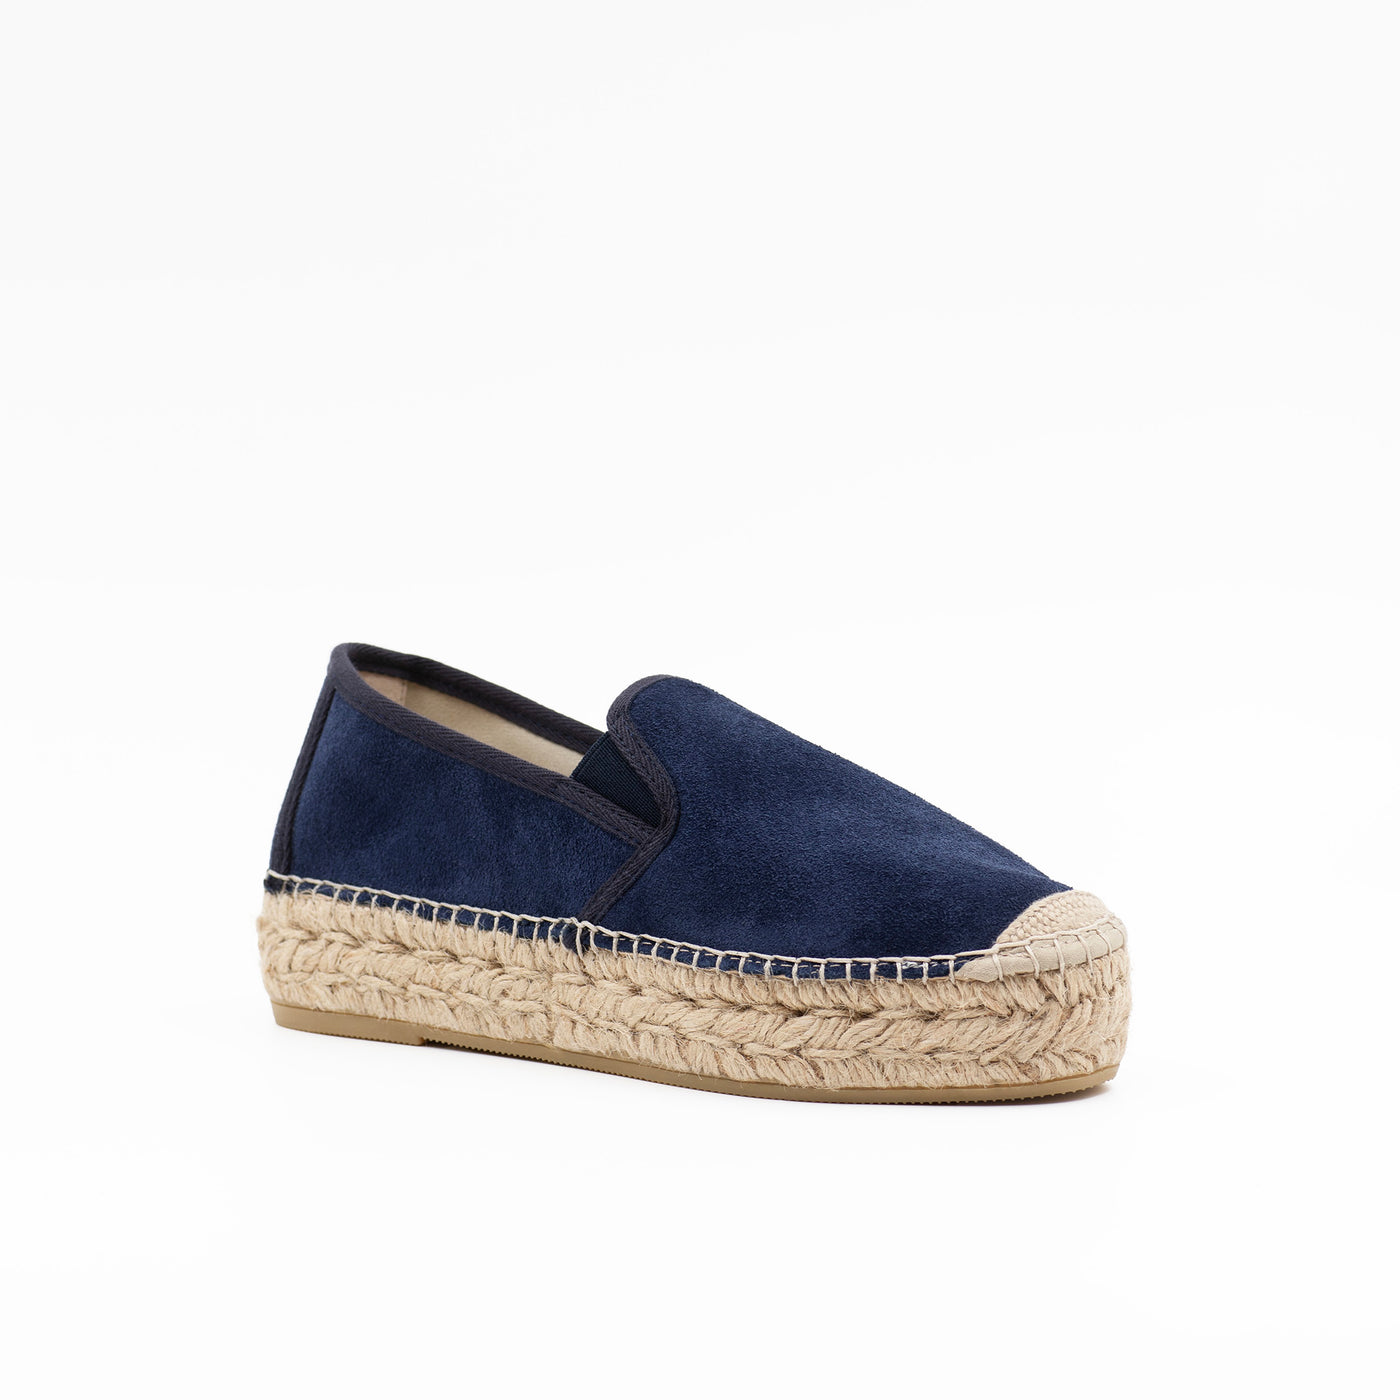 Espadrille in navy suede with chunky sole